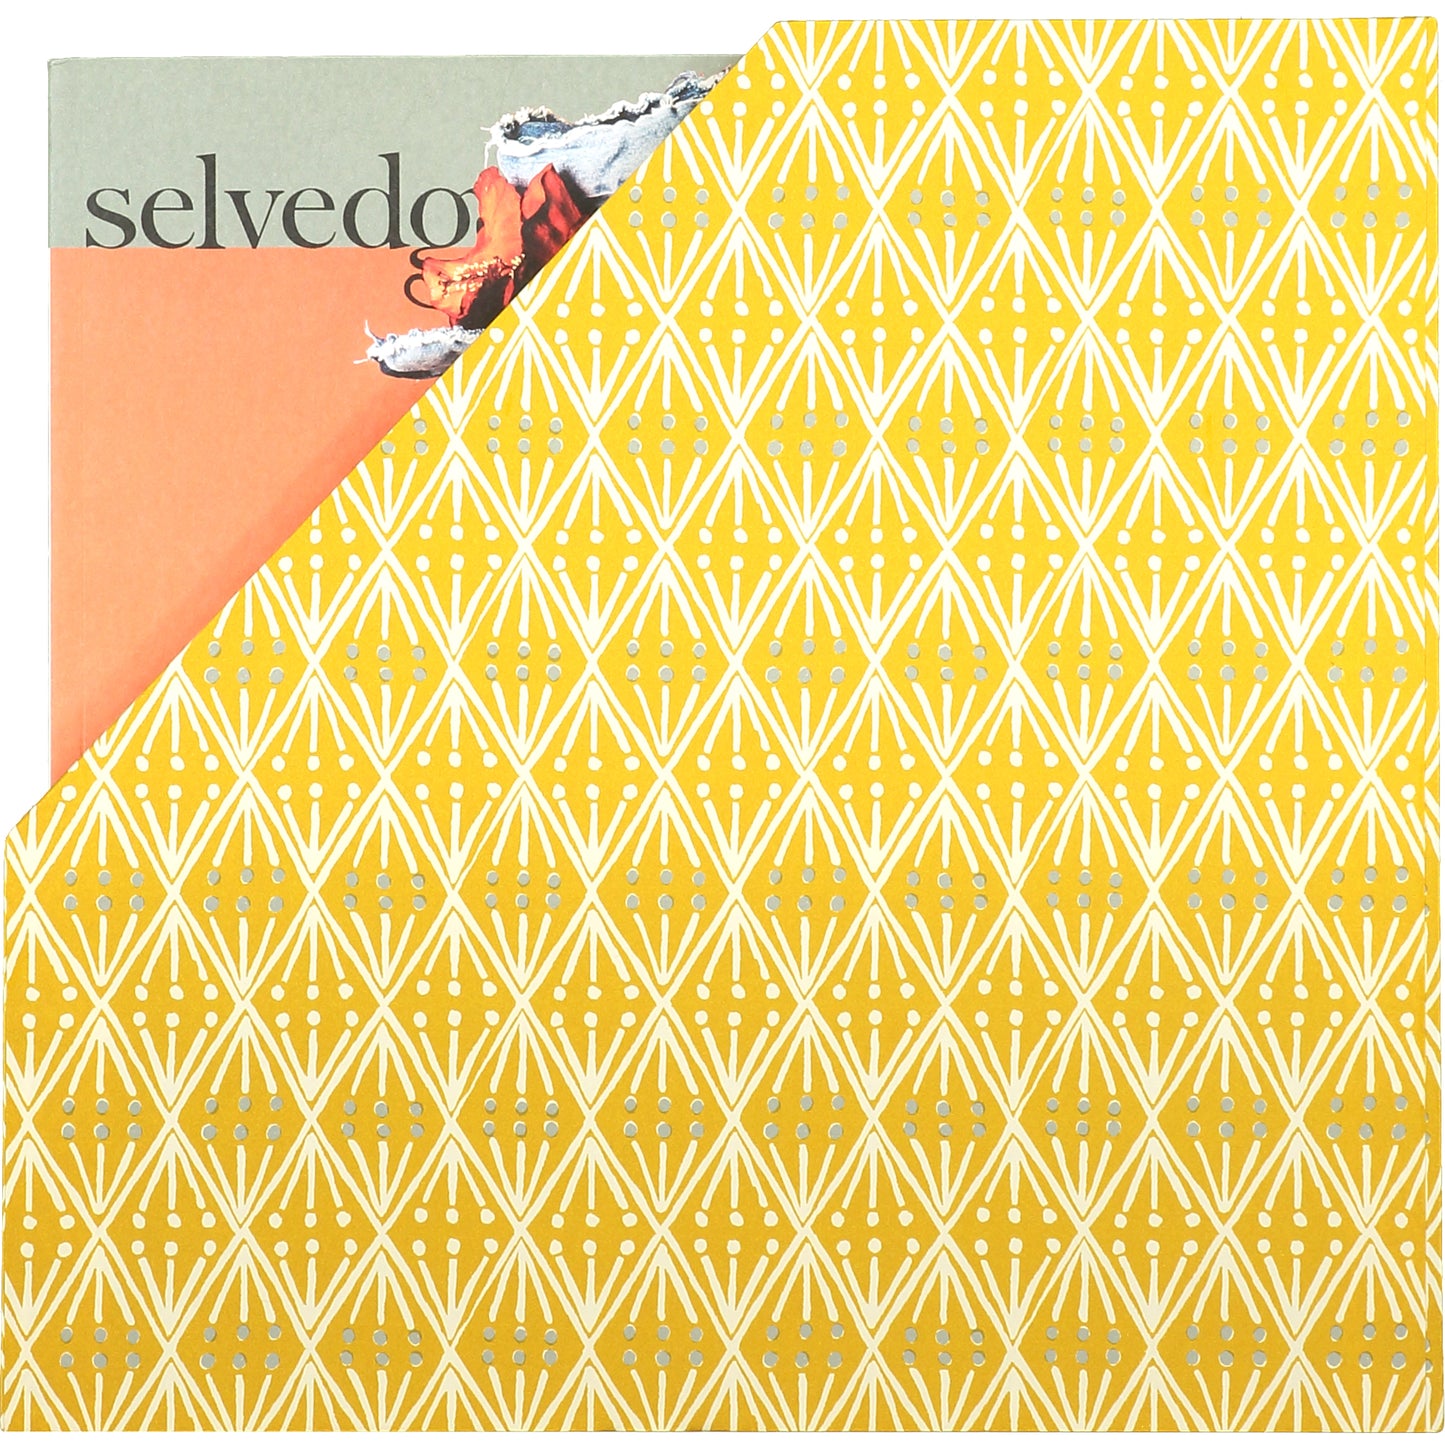 The Selvedge Magazine File by Cambridge Imprint (Available in three colourways)